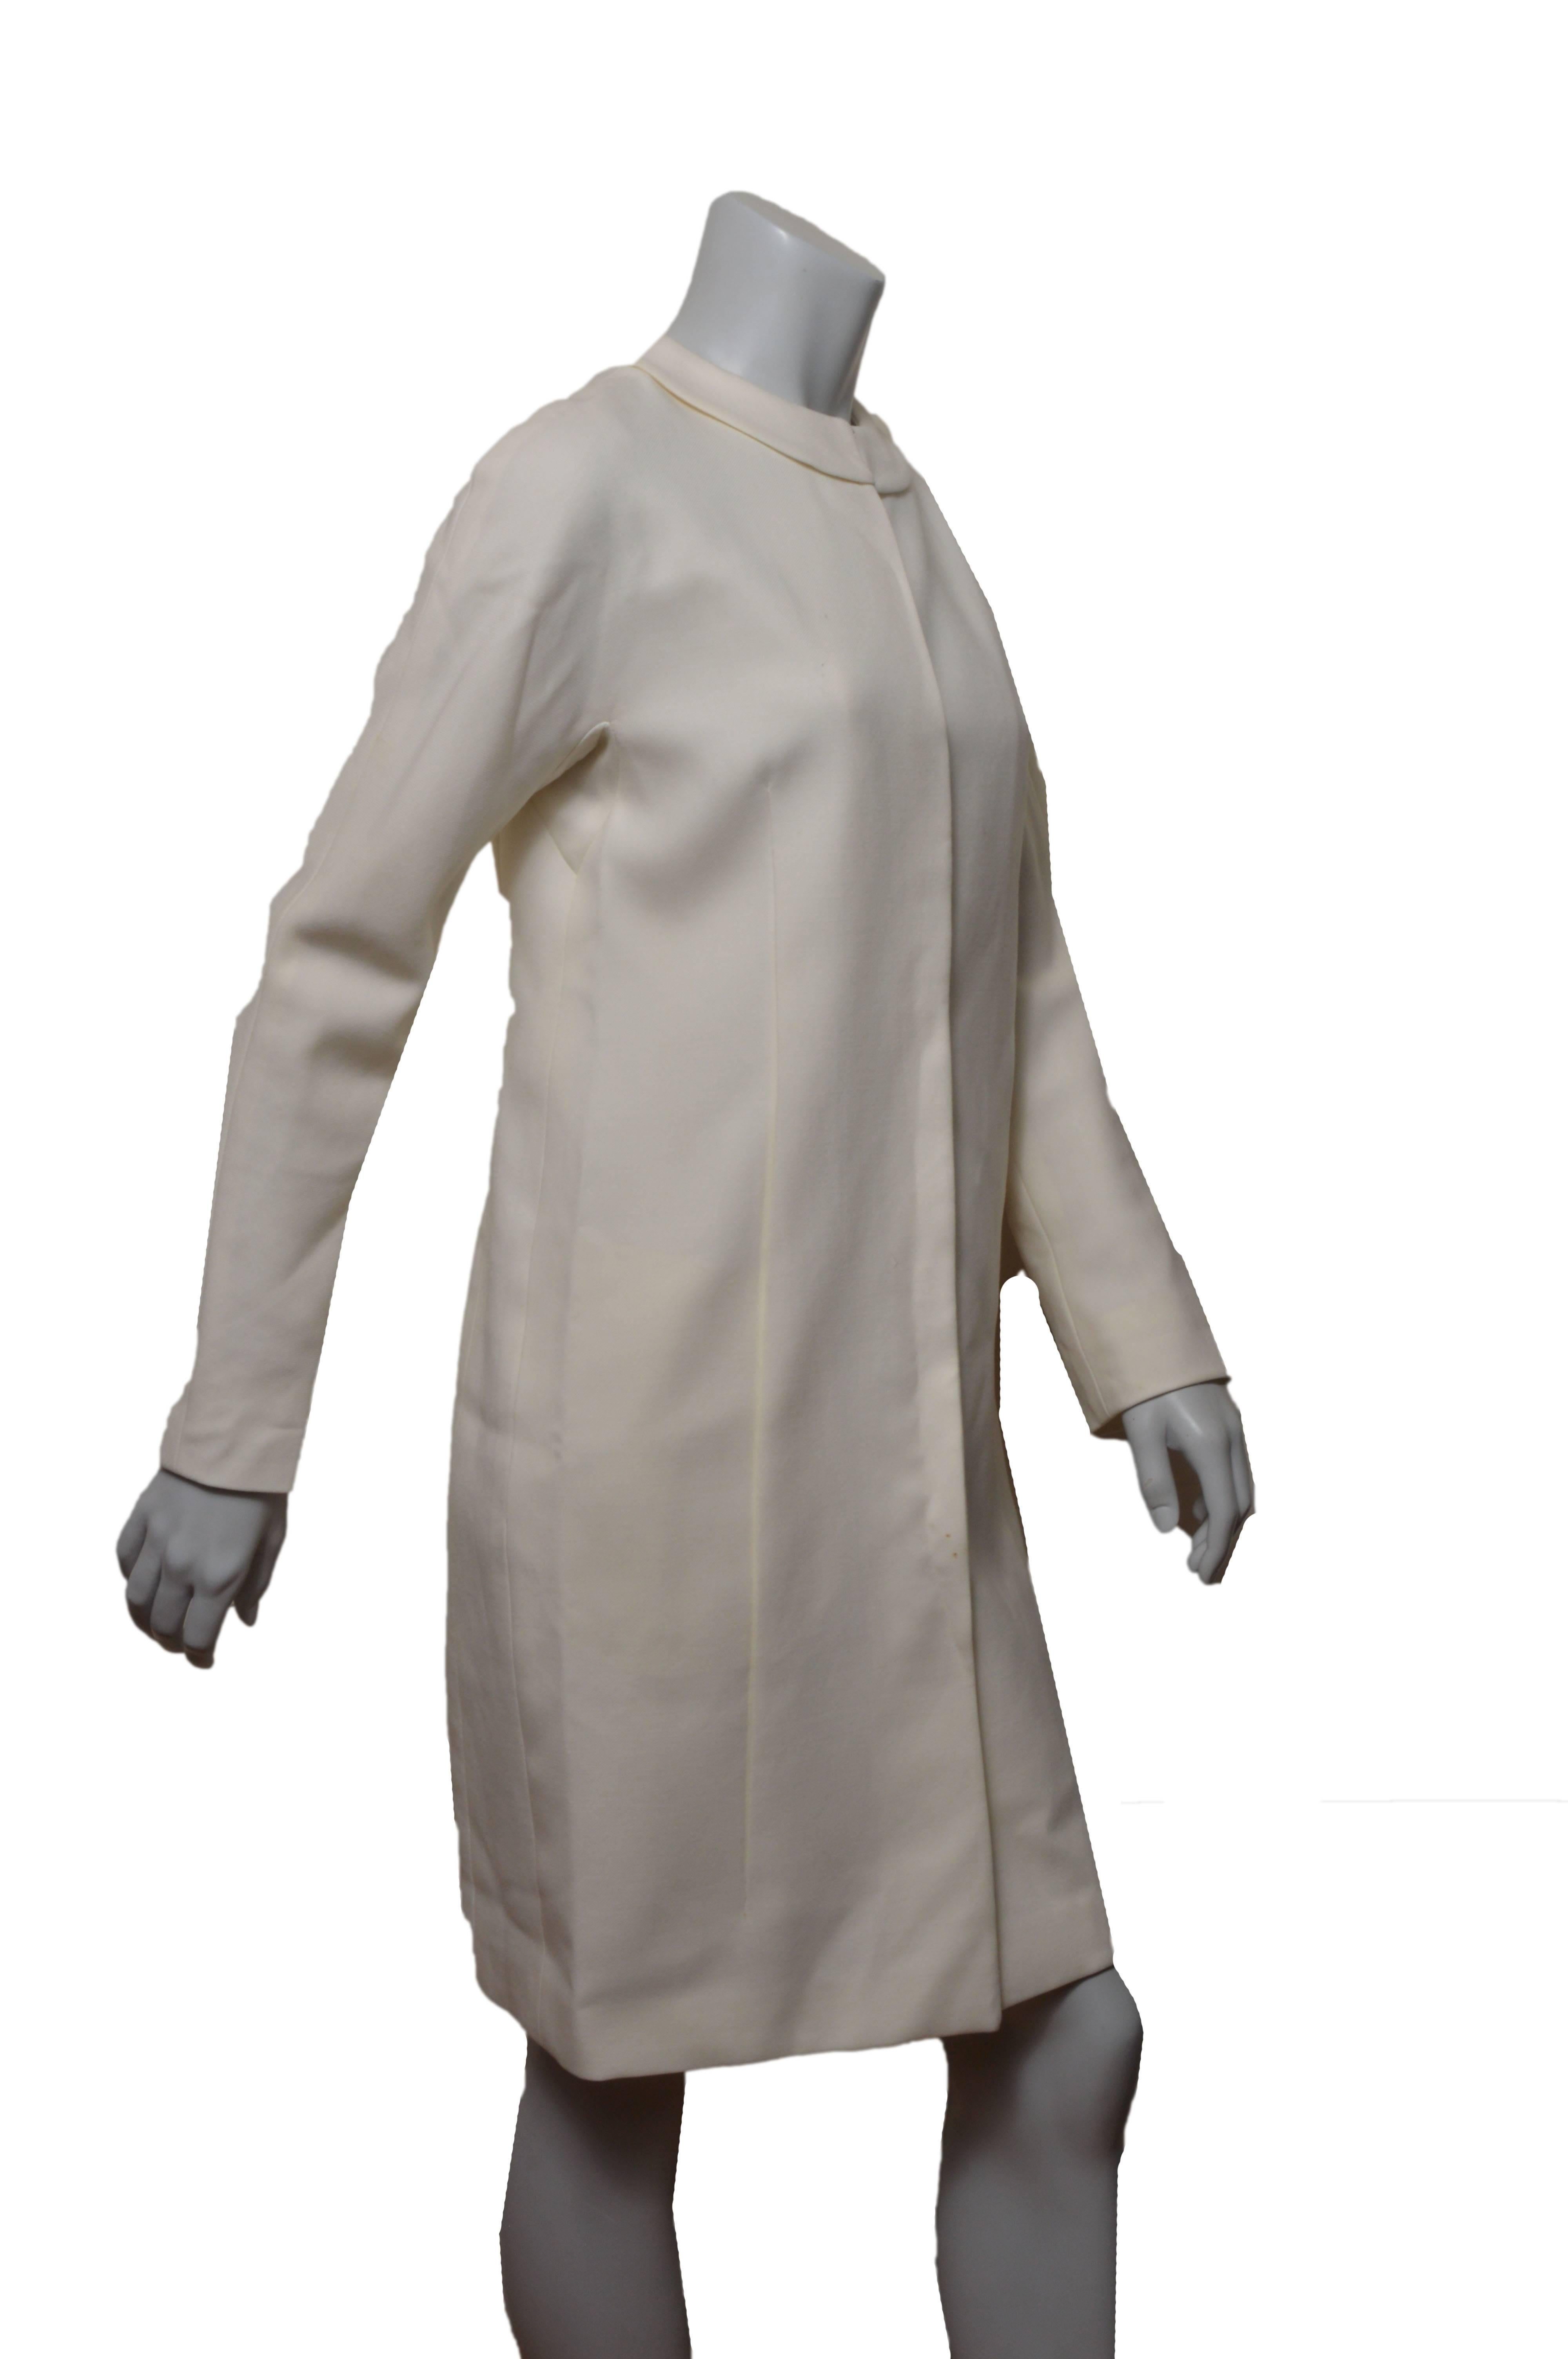 Minimalistic Jil Sander cream coat.
Round peter pan collar with hook and eye closure.
Two inverted pleats on front.
Hidden 5 button closure.
Lined.
Tagged a size 34.